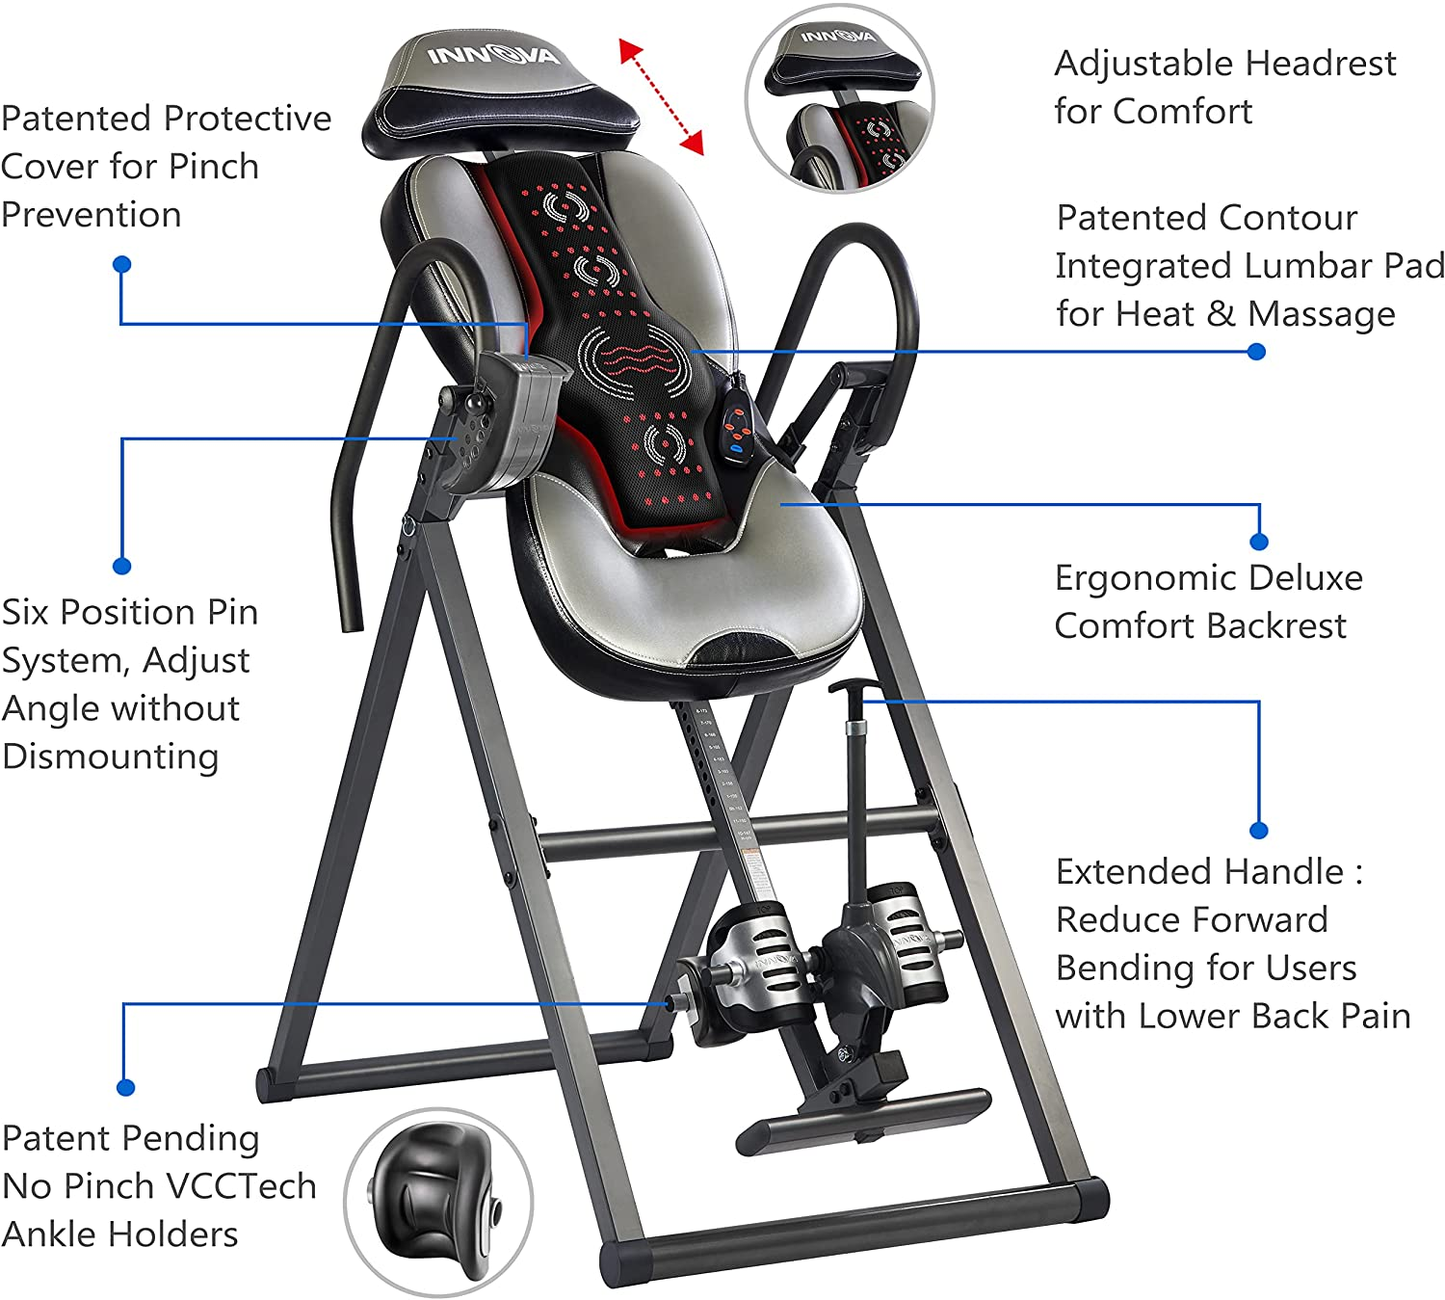 INNOVA HEALTH and FITNESS ITM5900 Advanced Heat and Massage Inversion Table